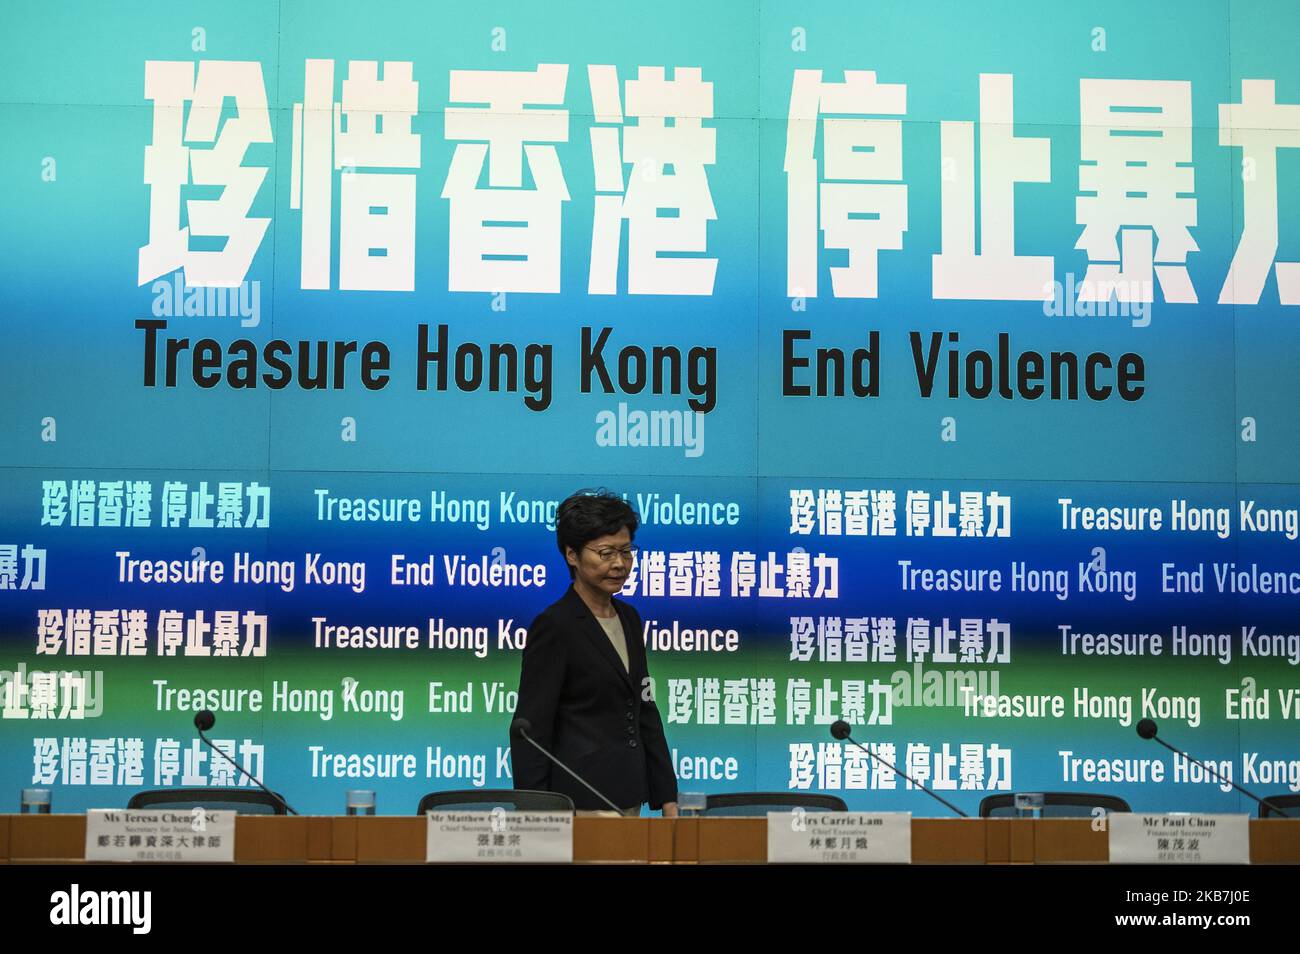 Hong Kong Chief Executive Carrie Lam is seen during a press conference in Hong Kong on October 4, 2019, Hong Kong invoked colonial-era emergency powers for the first time in more than half a century to ban face masks for protesters in a bid to quell months of violent unrest. (Photo by Vernon Yuen/NurPhoto) Stock Photo